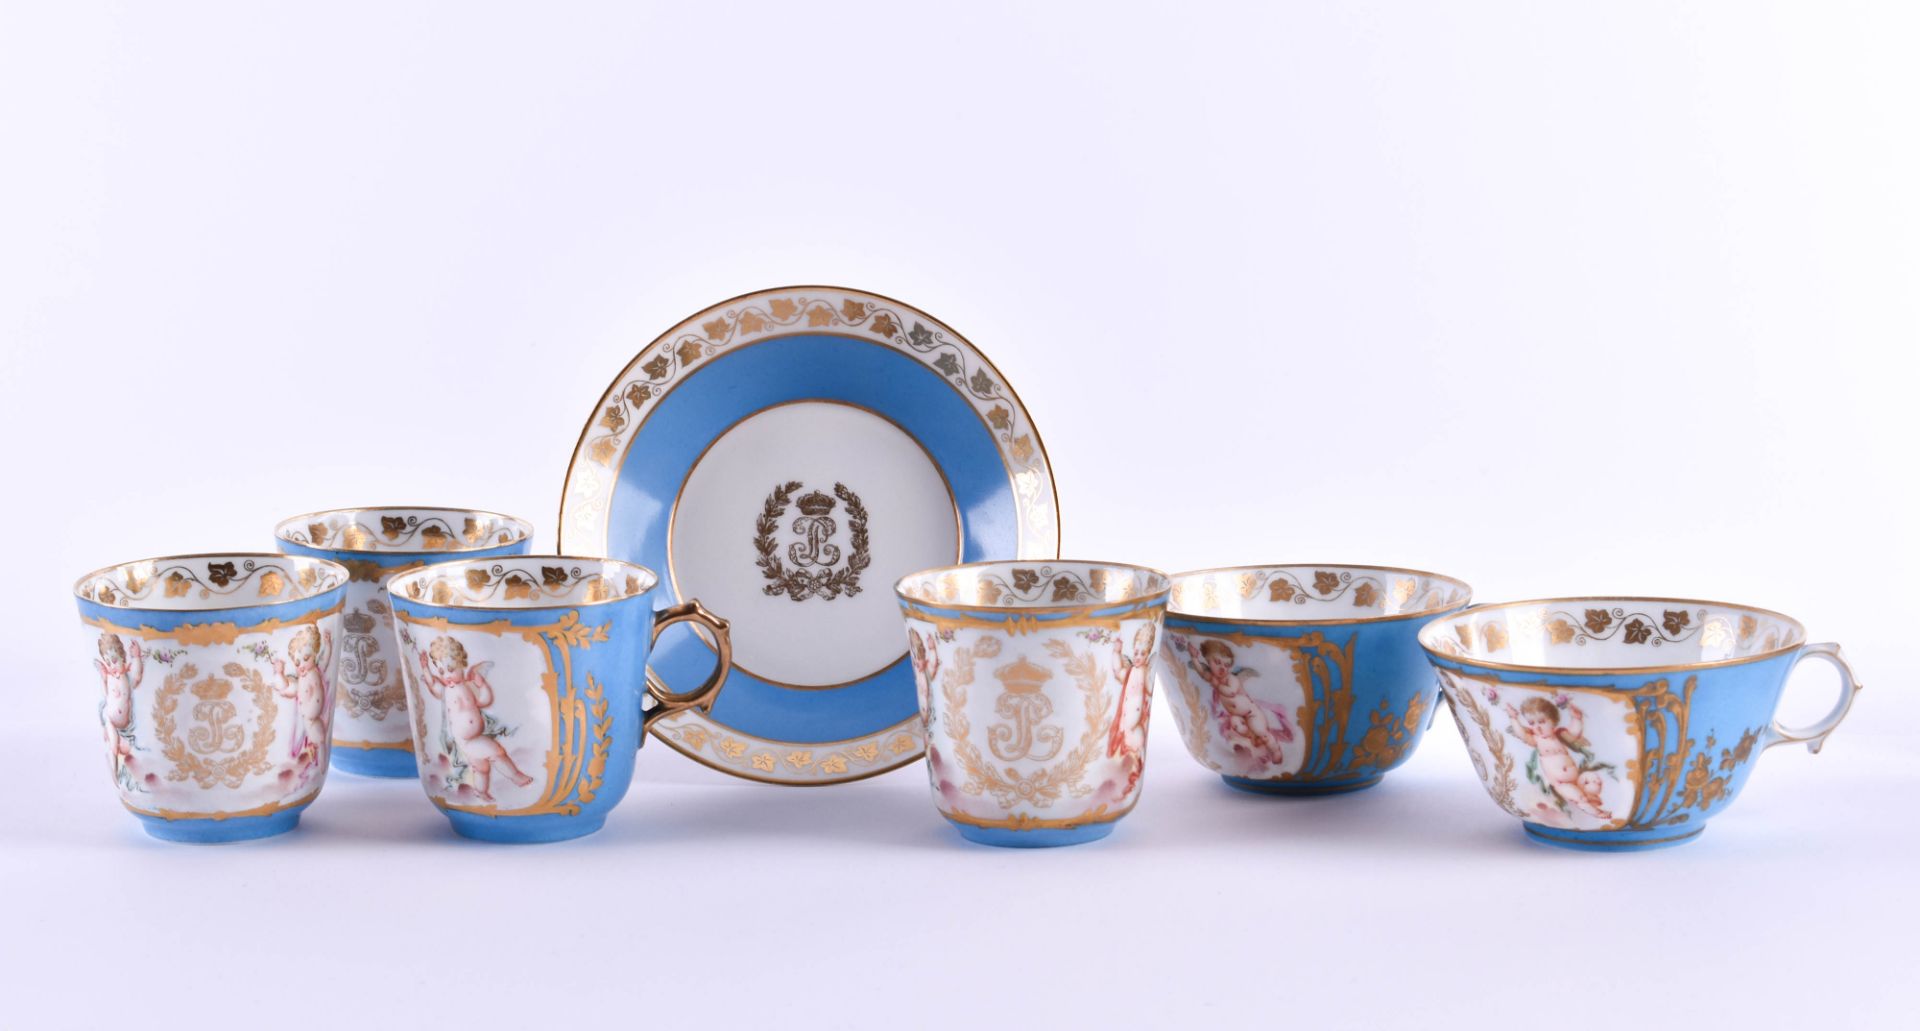 A group of Sevres KING LOUIS PHILIPPE DE FRANCE 18467 pieces, 4 coffee cups (height: 6.2 cm), 2